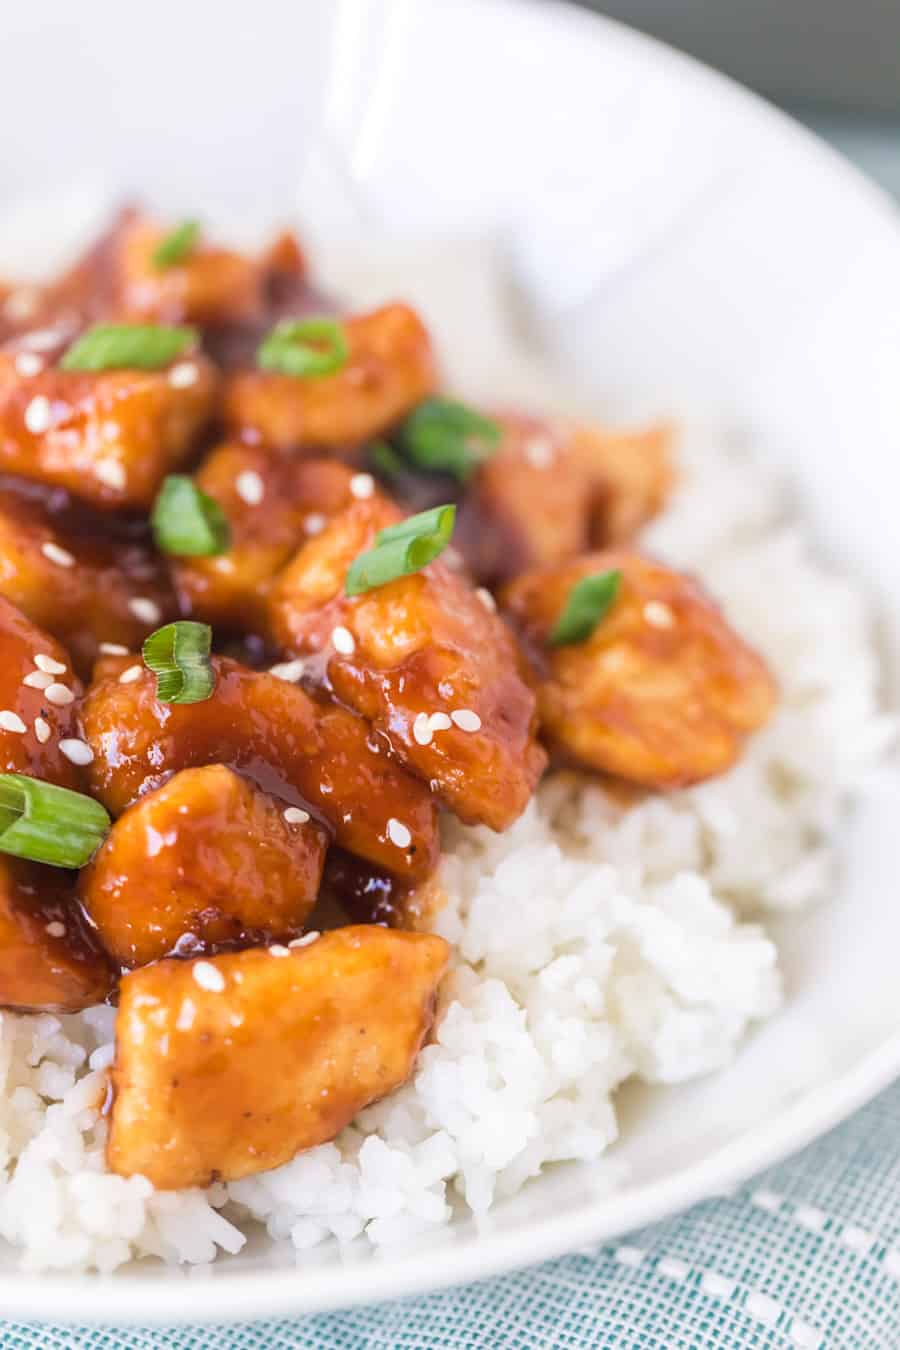 sticky general tso's chicken pieces over rice in a white bowl up close.